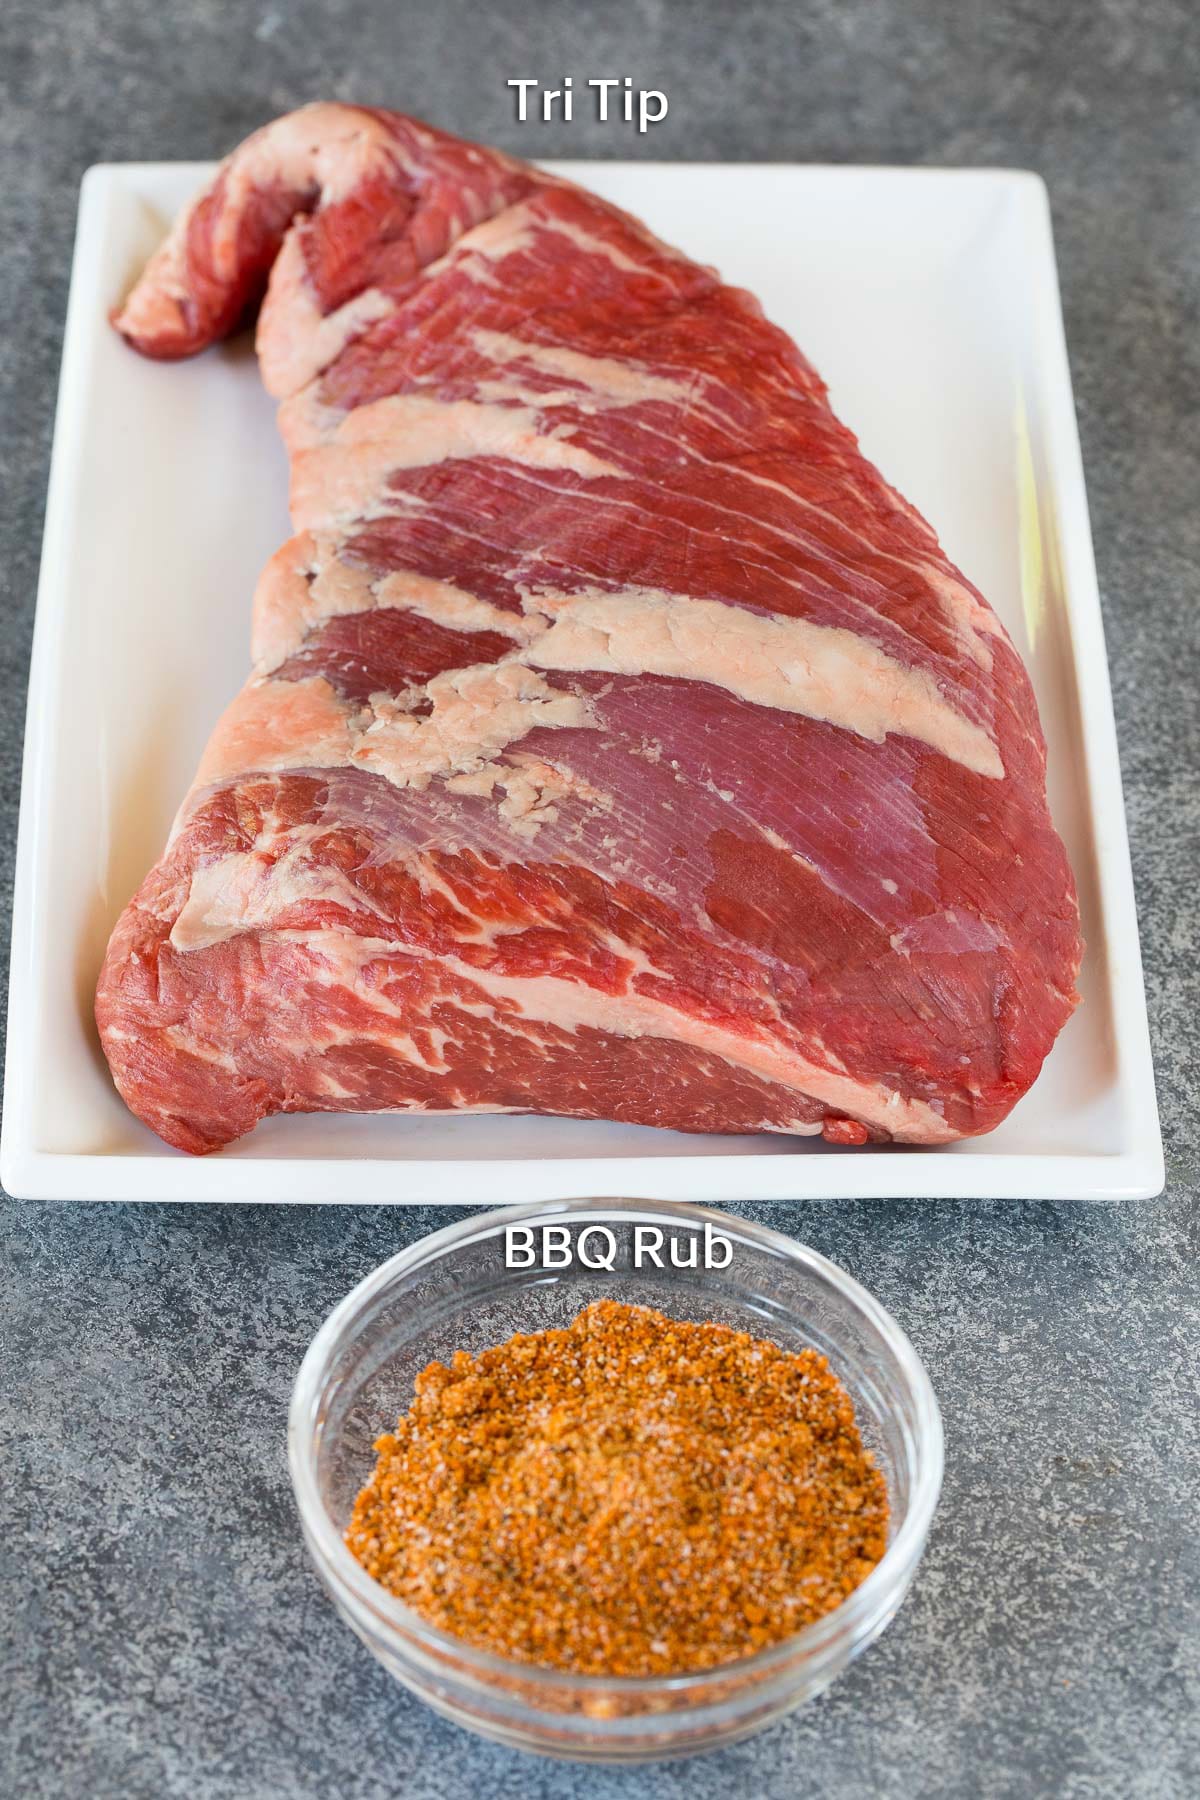 A beef roast and a bowl of BBQ rub.